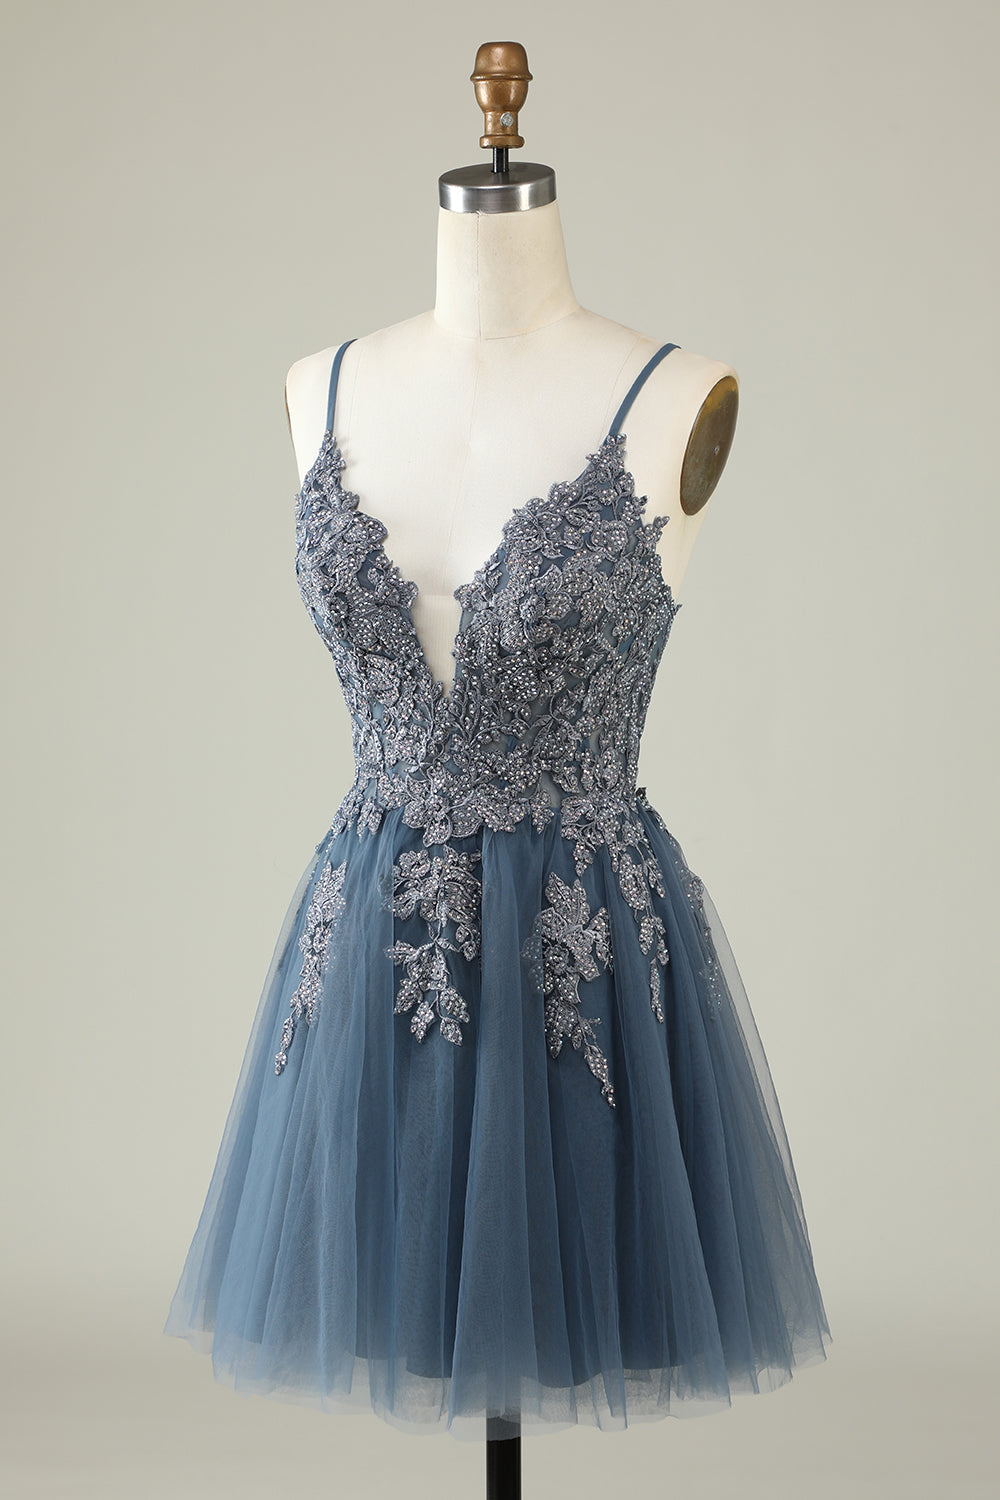 Simple Spaghetti Straps Tulle Vintage Homecoming Dress with Lace Appliques